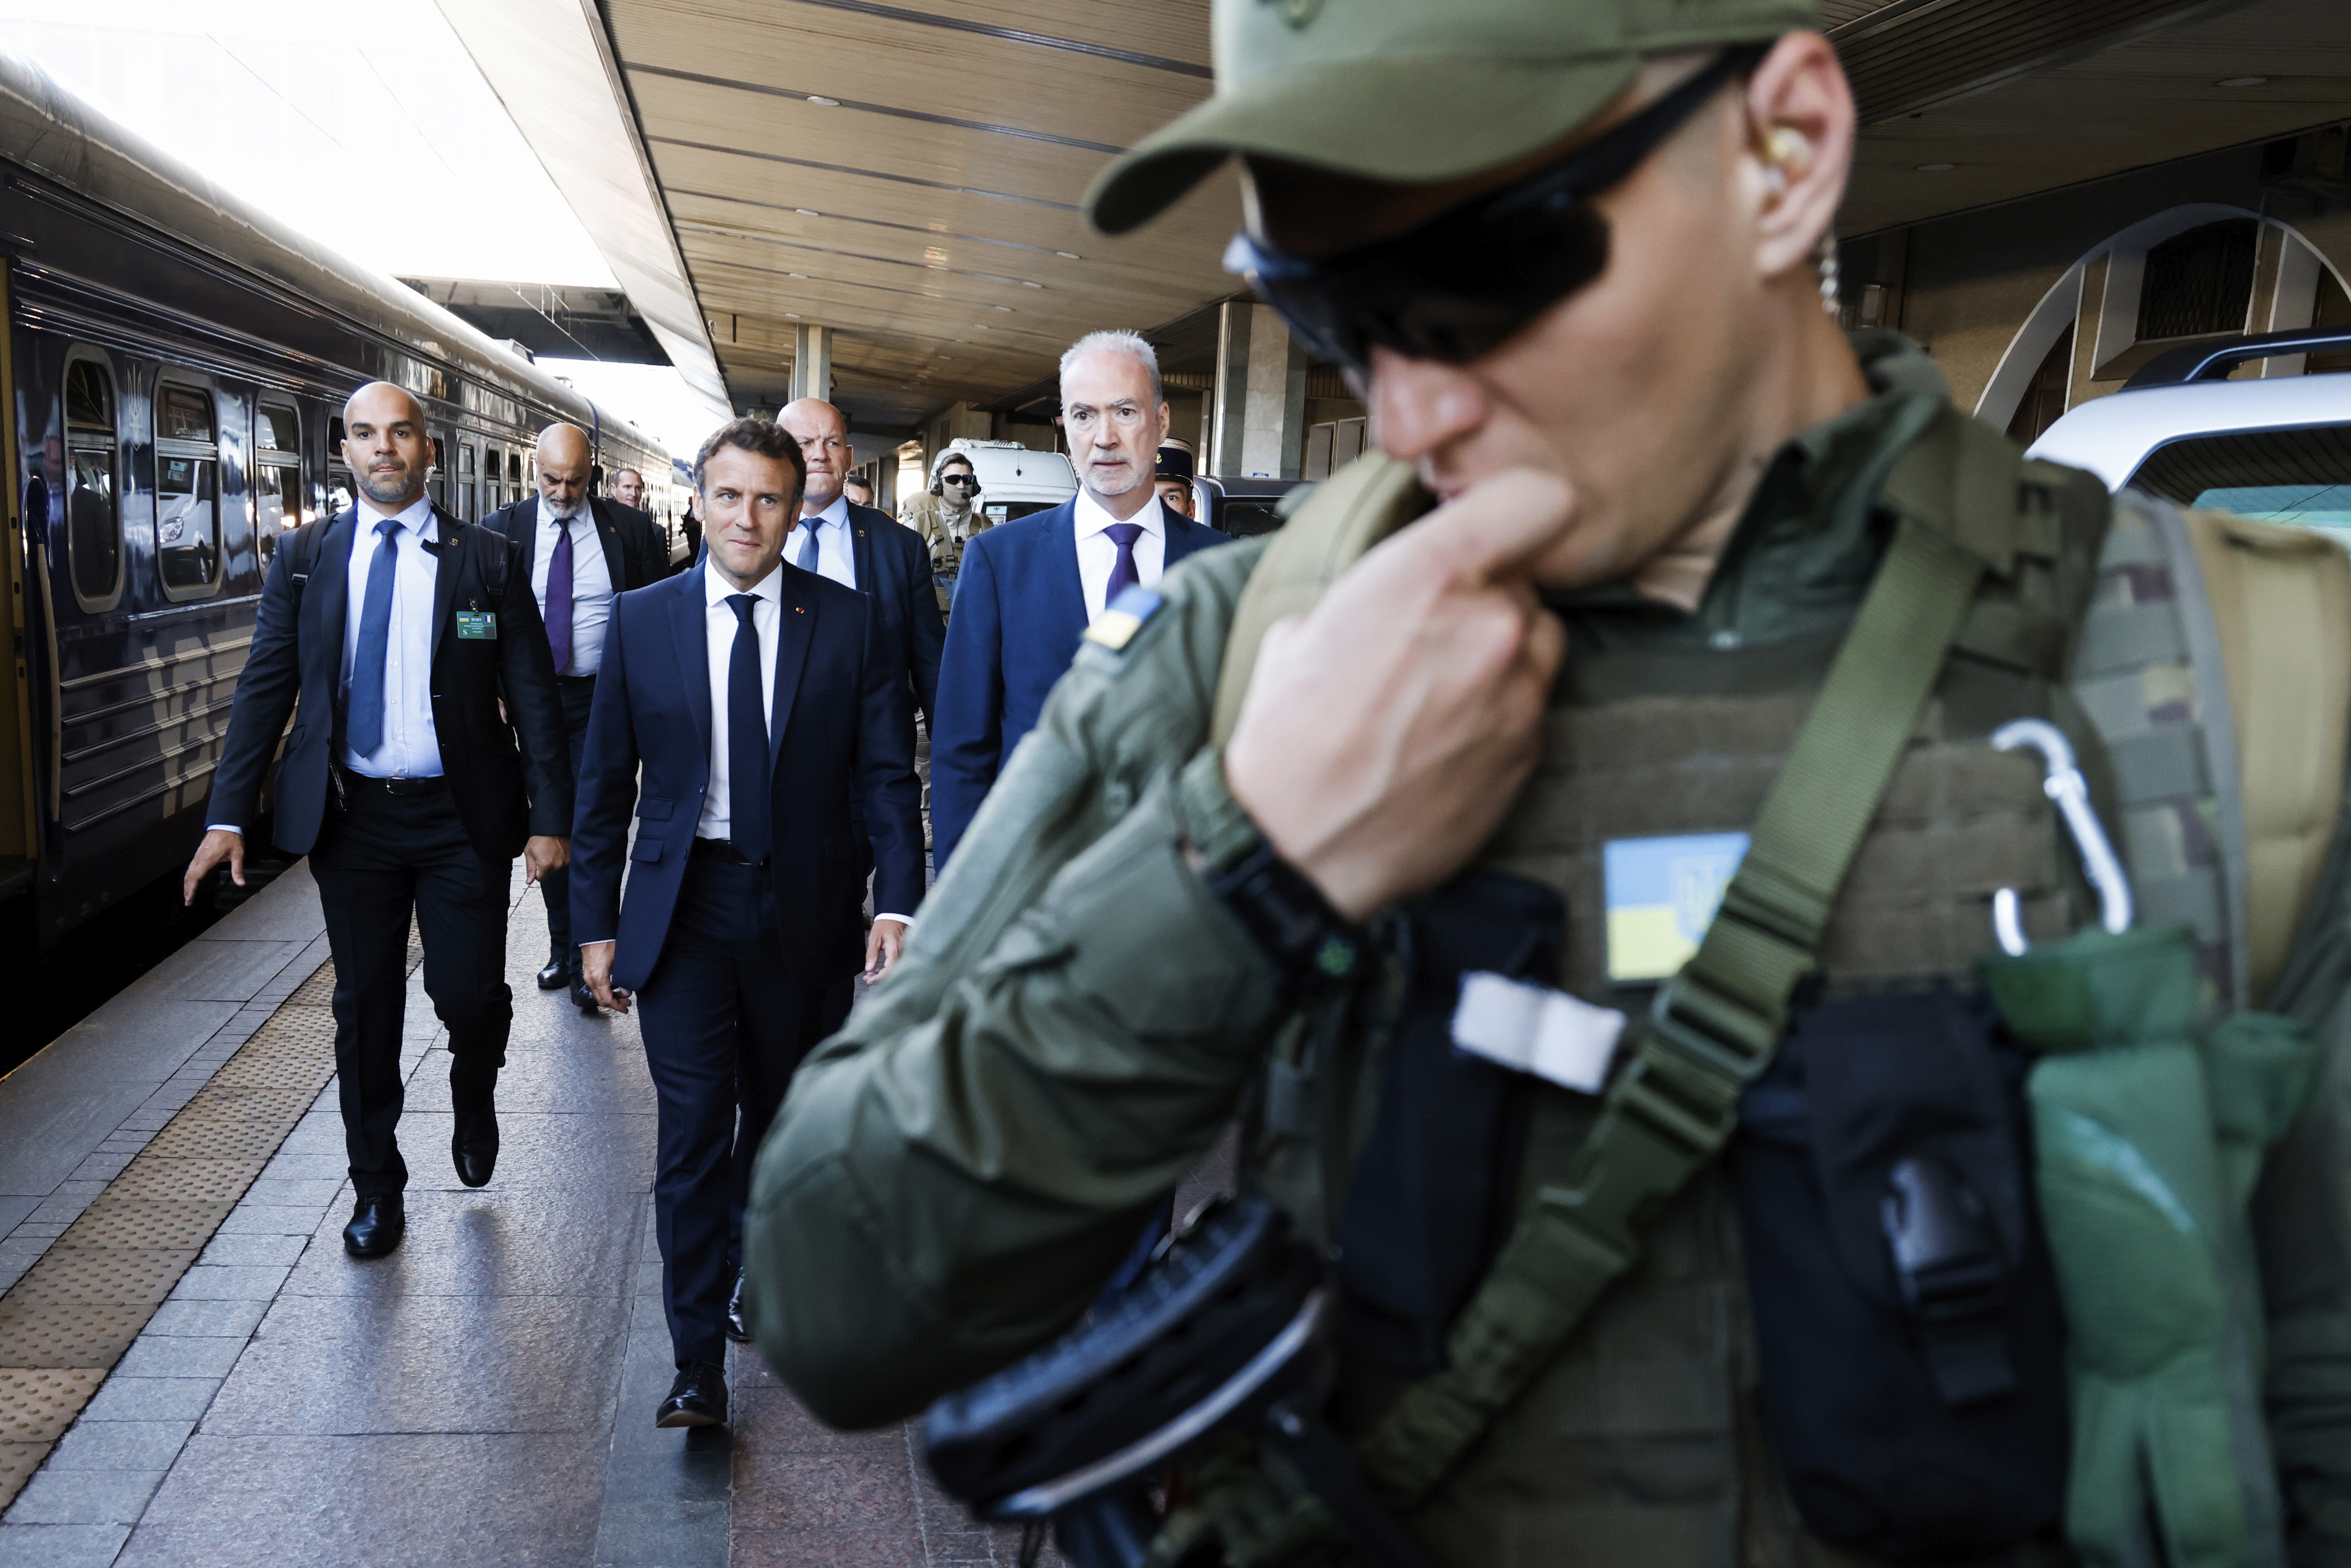 French President Emmanuel Macron, centre, is escorted as he arrives at the Kyiv train station, Thursday, June 16, 2022. French President Emmanuel Macron Prime Minister Mario Draghi and German Chancellor Olaf Scholz are expected to meet with Ukraine's President Volodymyr Zelenskyy as they prepare for a key European Union leaders' summit in Brussels next week and a June 29-30 NATO summit in Madrid.(Ludovic Marin, Pool via AP)